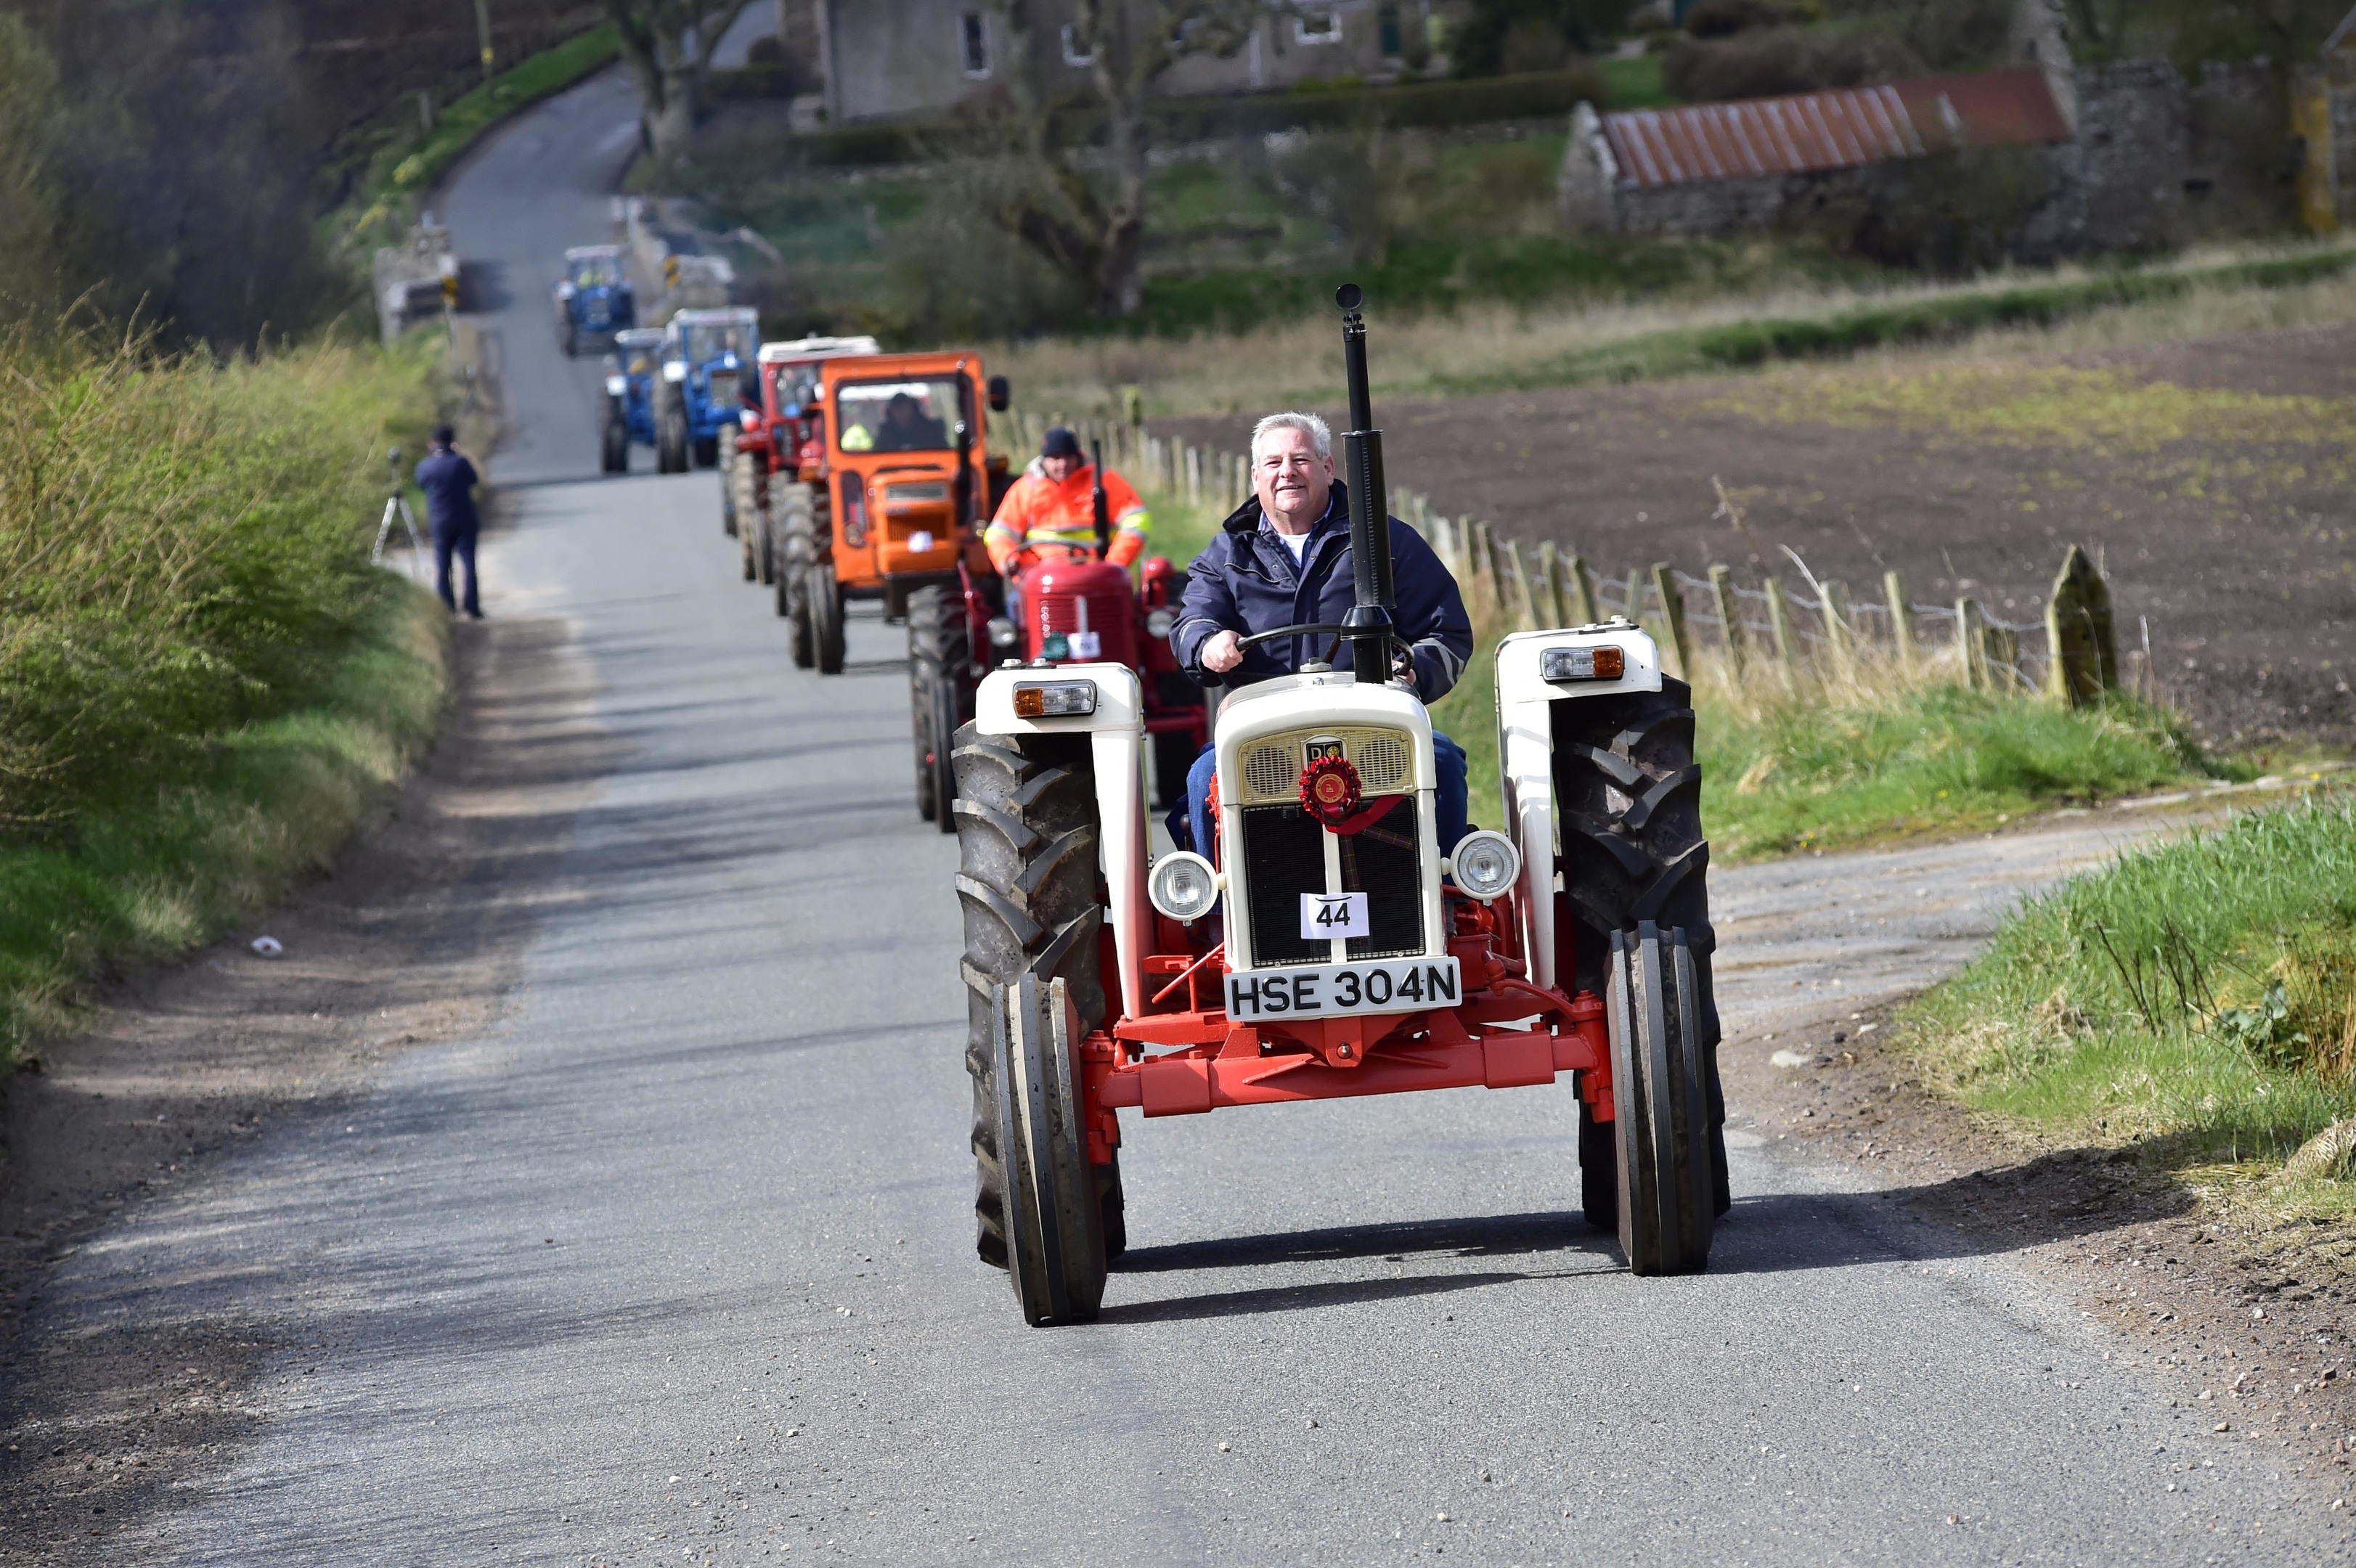 Members of the Buchan Vintage Tractor Club on their annual charity run through the Buchan countryside.